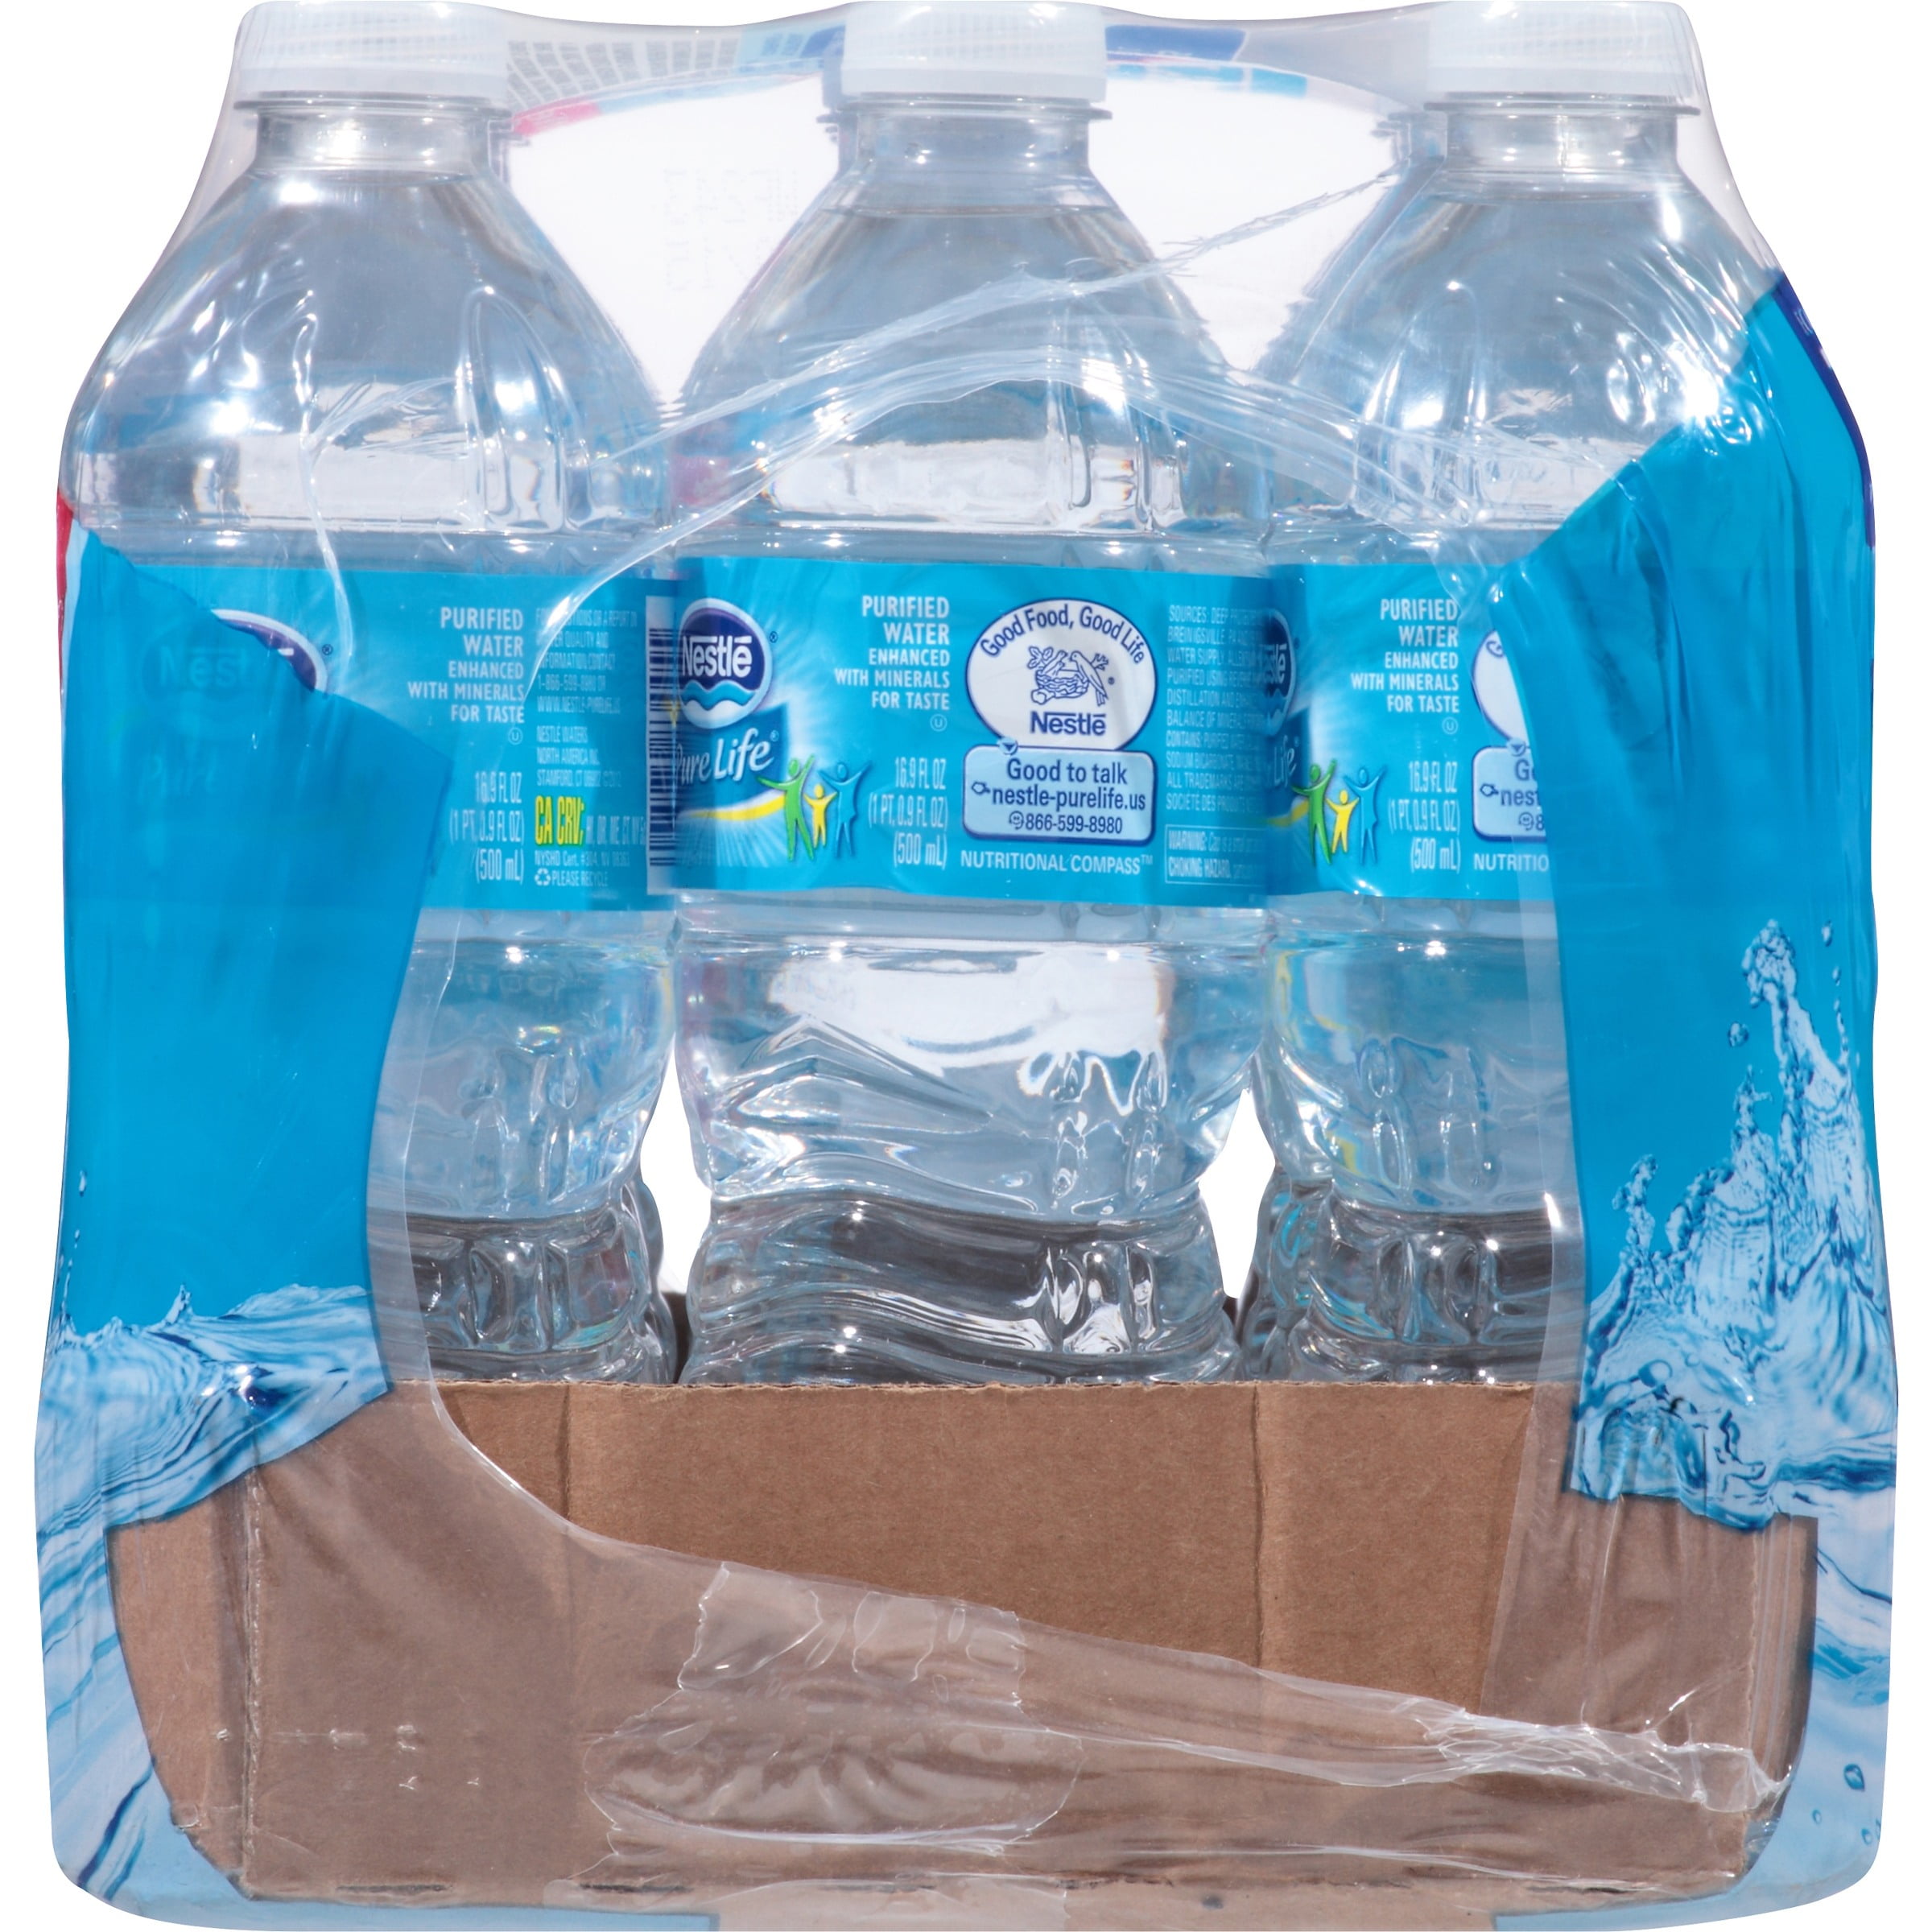 Pure Life Purified Water, 16.9 Fl Oz, Plastic Bottled Water (12 Pack)